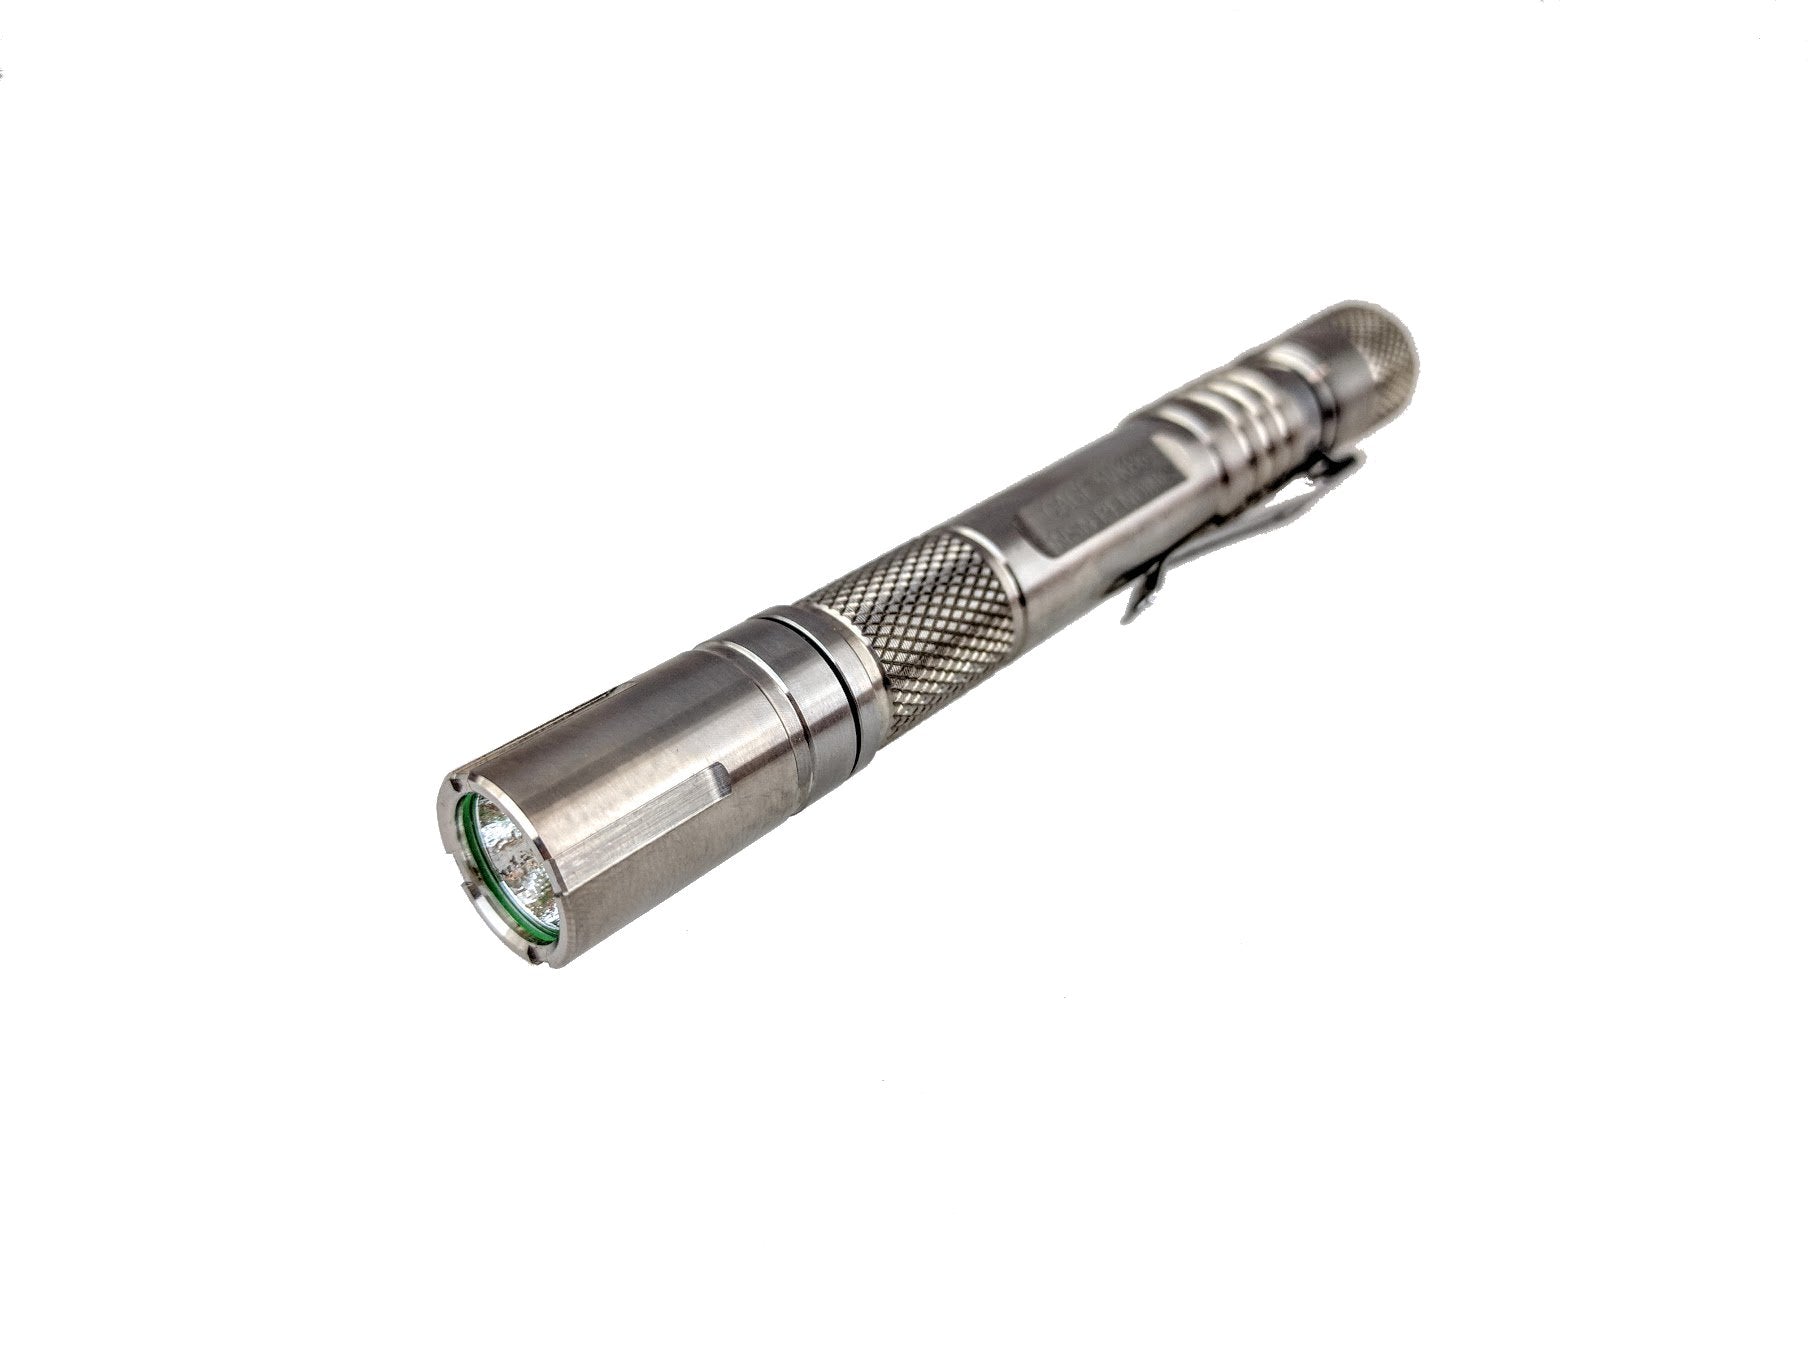 Titanium - Inspection : AAAx2 Extreme - Tactical Light by Maratac 